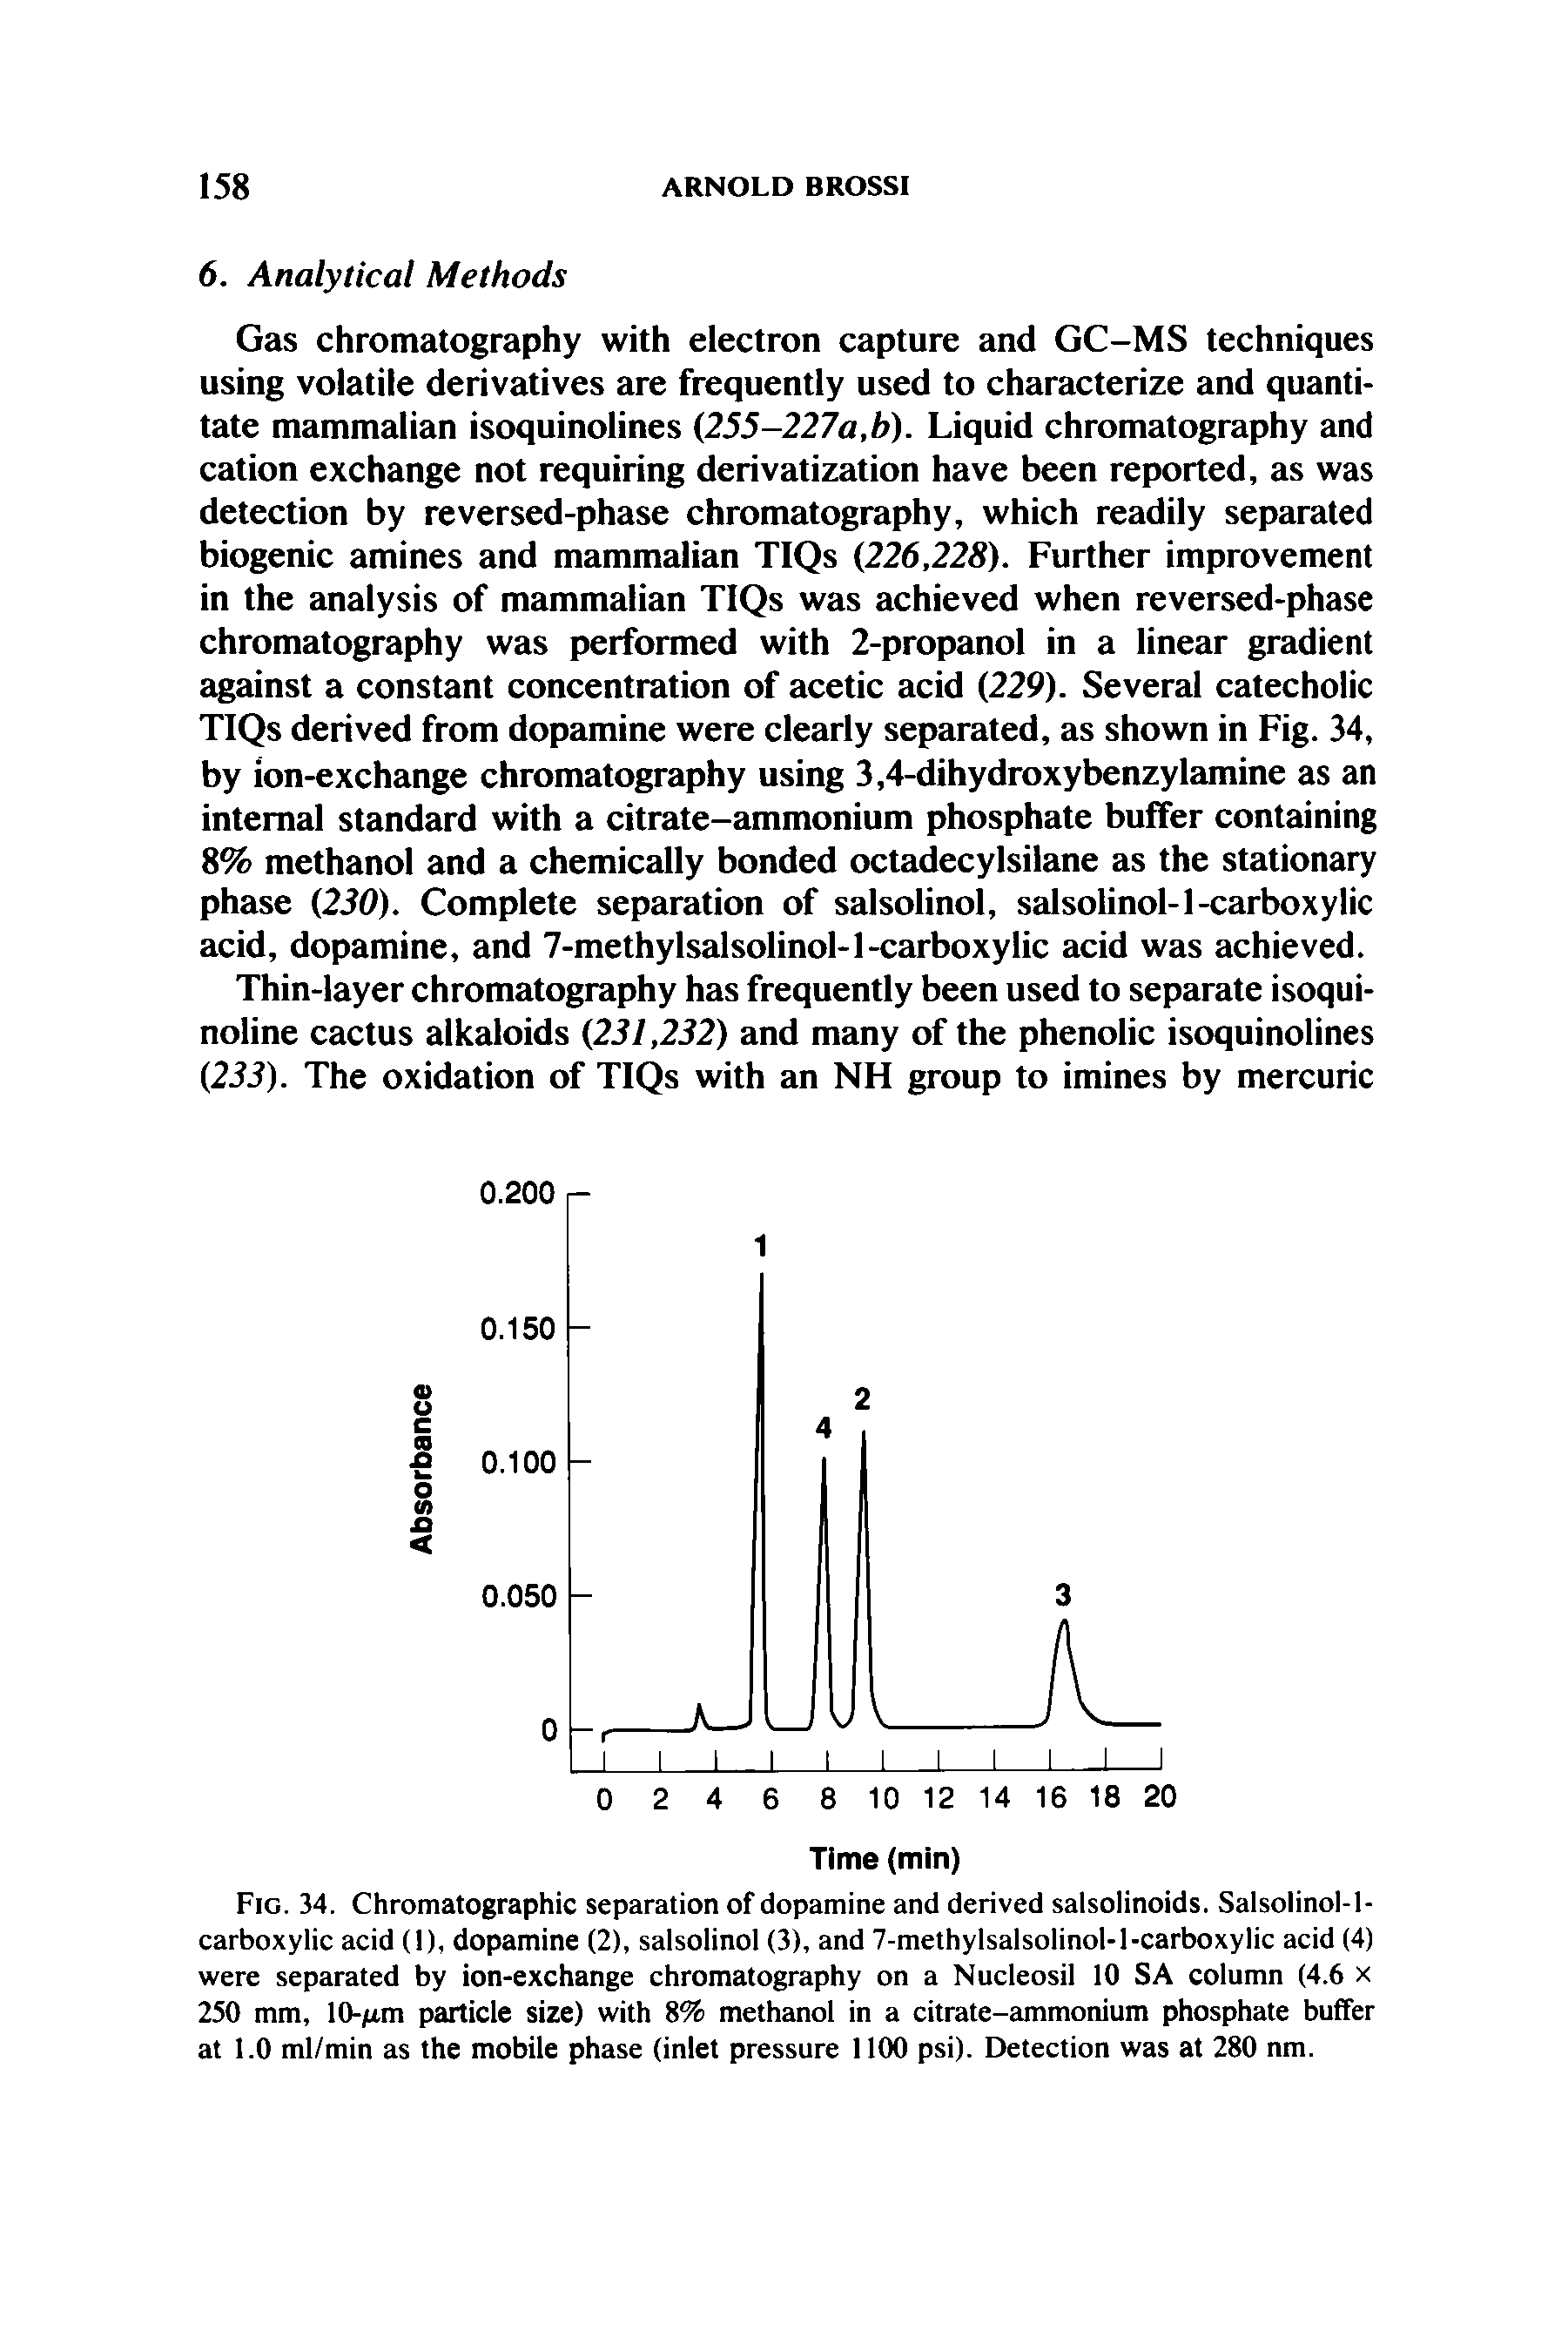 Fig. 34. Chromatographic separation of dopamine and derived salsolinoids. Salsoiinol-1-carboxylic acid (1), dopamine (2), saisolinol (3), and 7-methylsalsolinol-l-carboxylic acid (4) were separated by ion-exchange chromatography on a Nucleosil 10 SA column (4.6 x 250 mm, 10-/Ltm particle size) with 8% methanol in a citrate-ammonium phosphate buffer at I.O ml/min as the mobile phase (inlet pressure 1100 psi). Detection was at 280 nm.